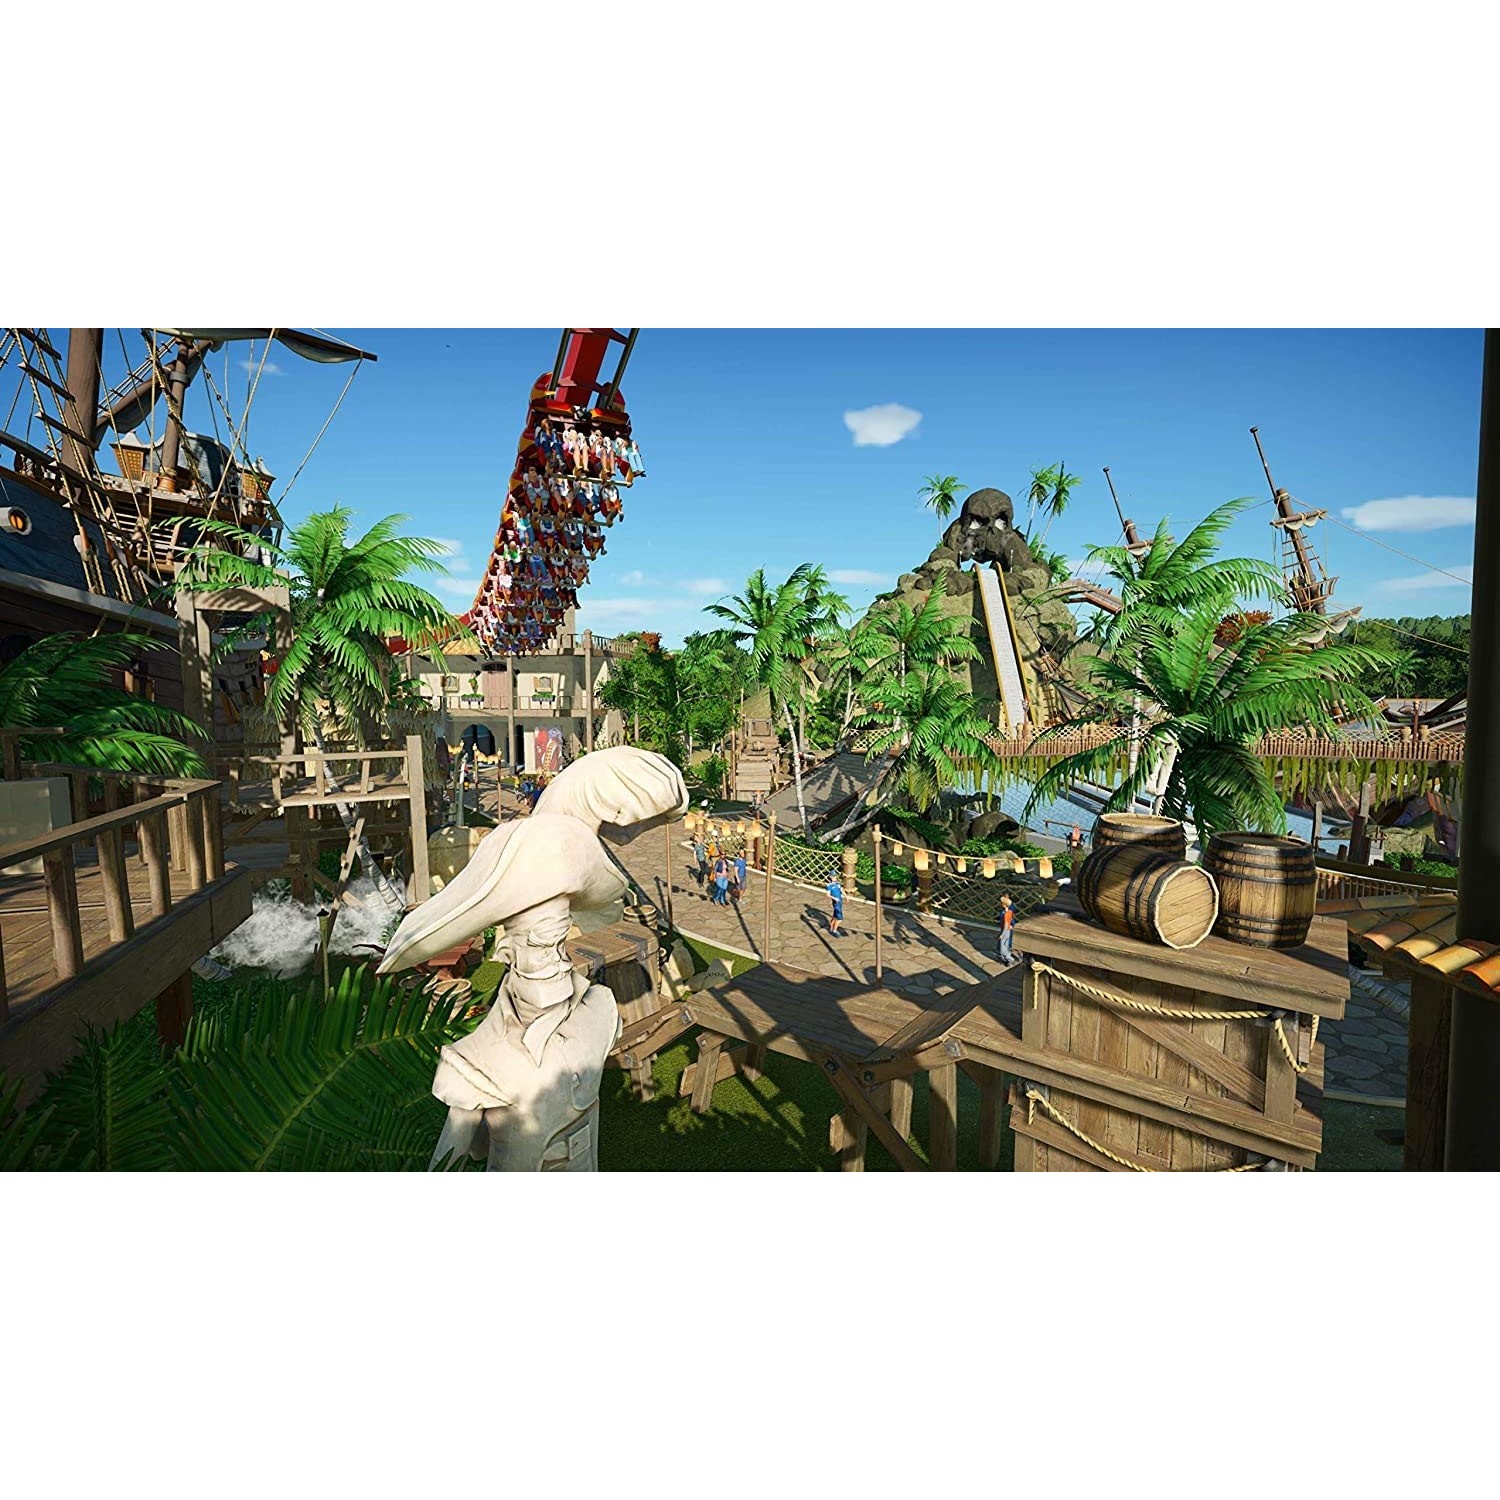 download planet coaster ps5 for free